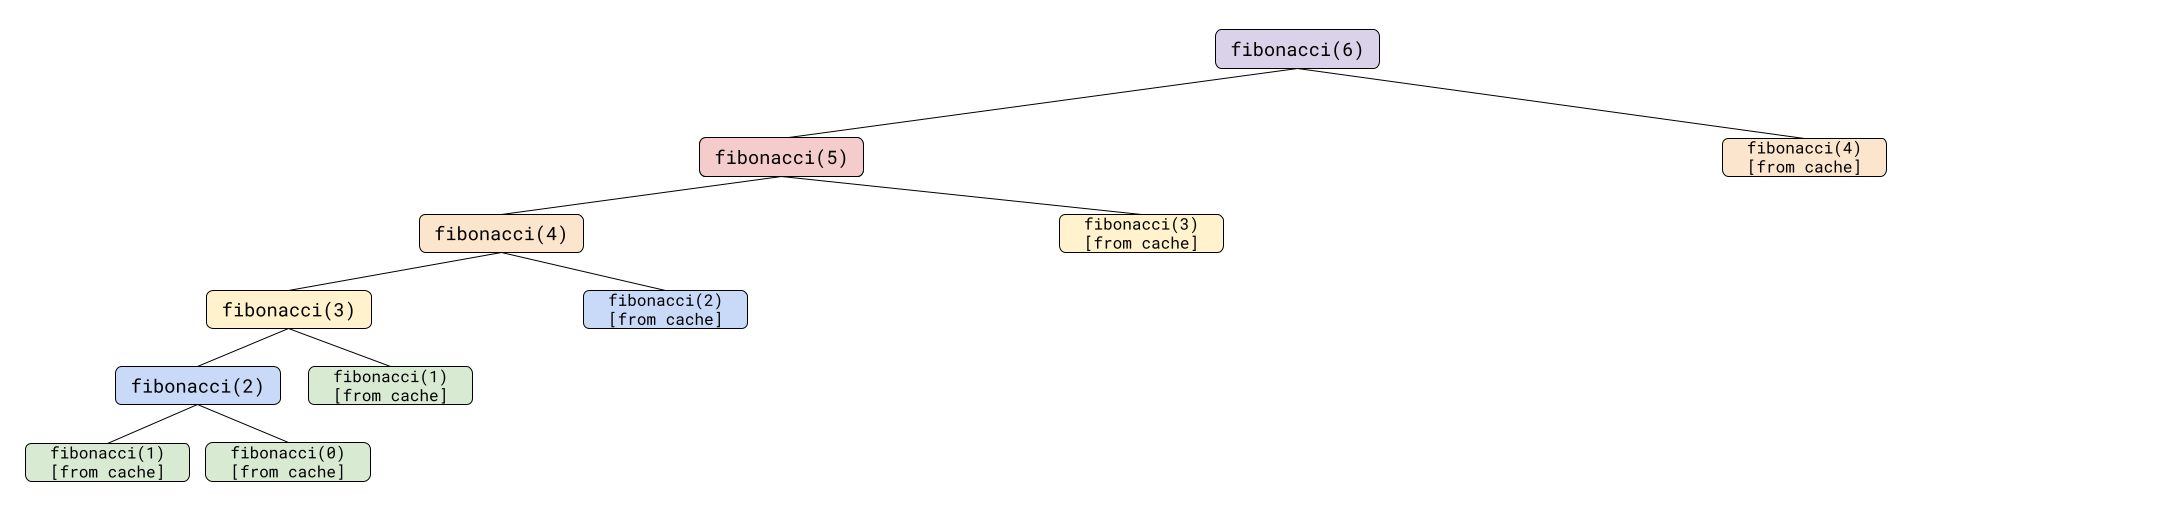 A tree diagram showing the recursive function calls required to calculate fibonacci(6) using dynamic programming. It shows 11 recursive calls.